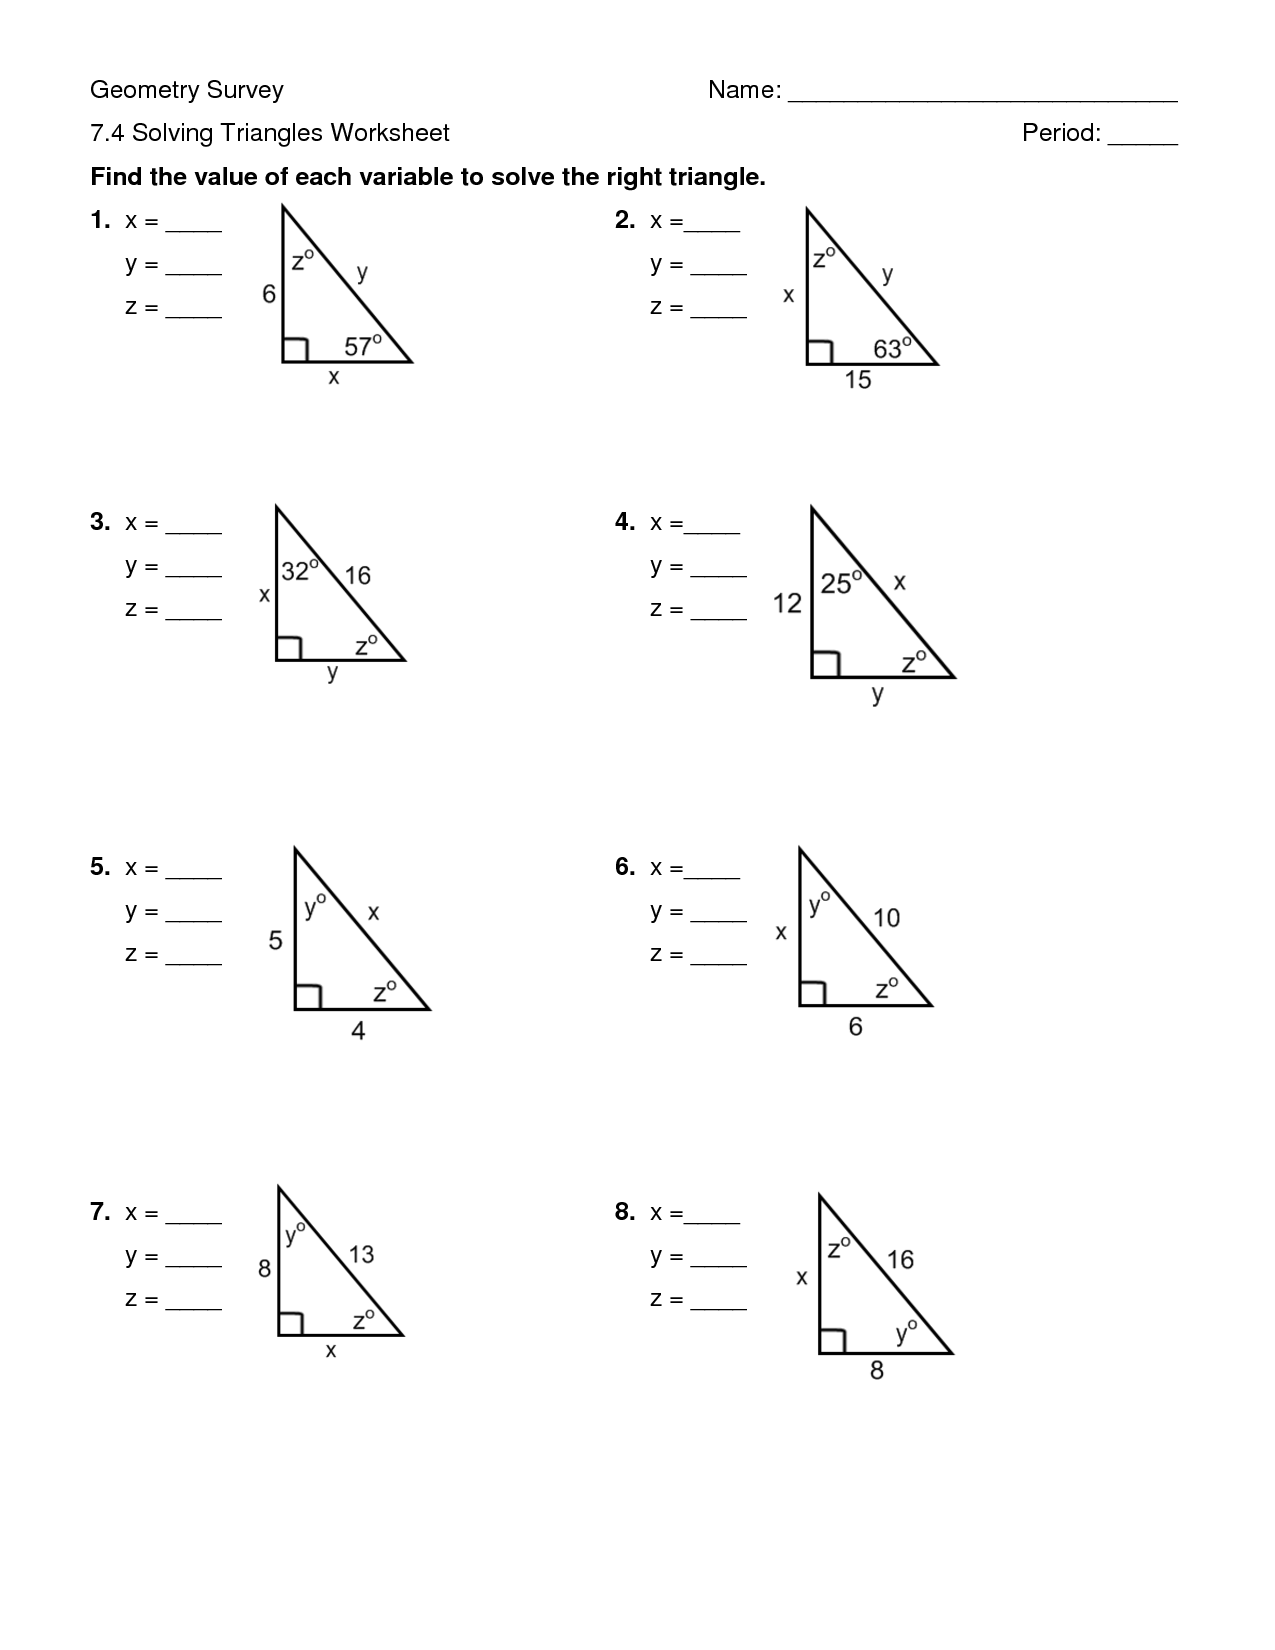 geometry-5-8-special-right-triangles-worksheet-answer-key-uploadise